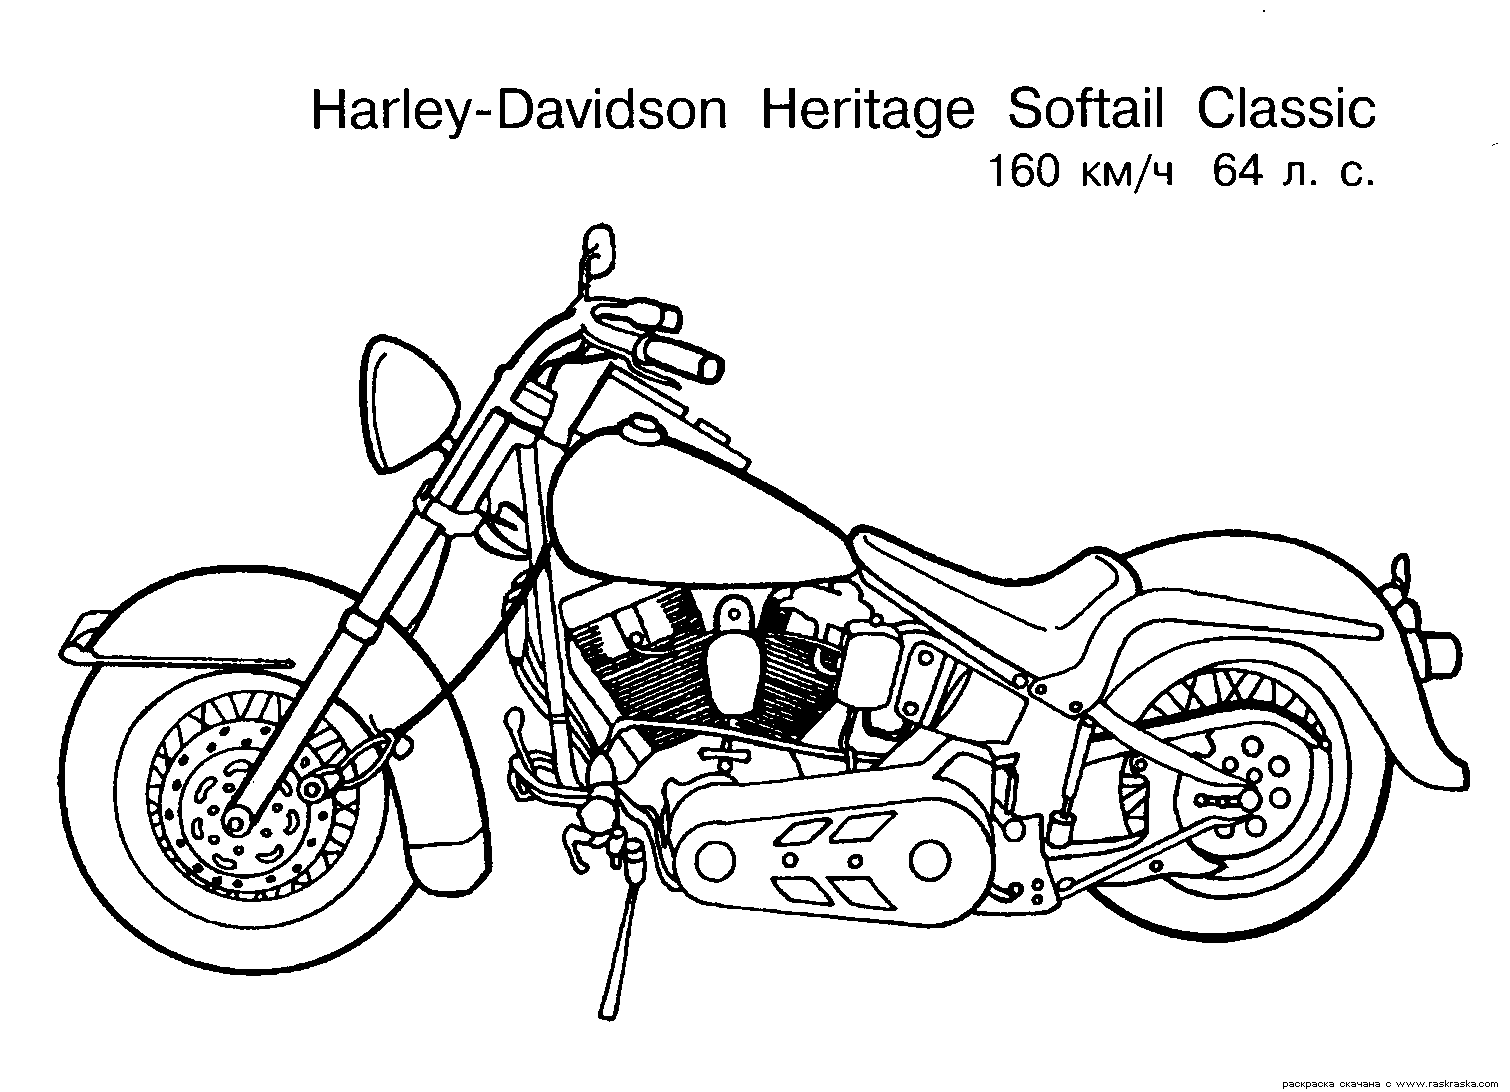 Free Motorcycle coloring page, letscoloringpages.com, Harley-Davidson Heritage